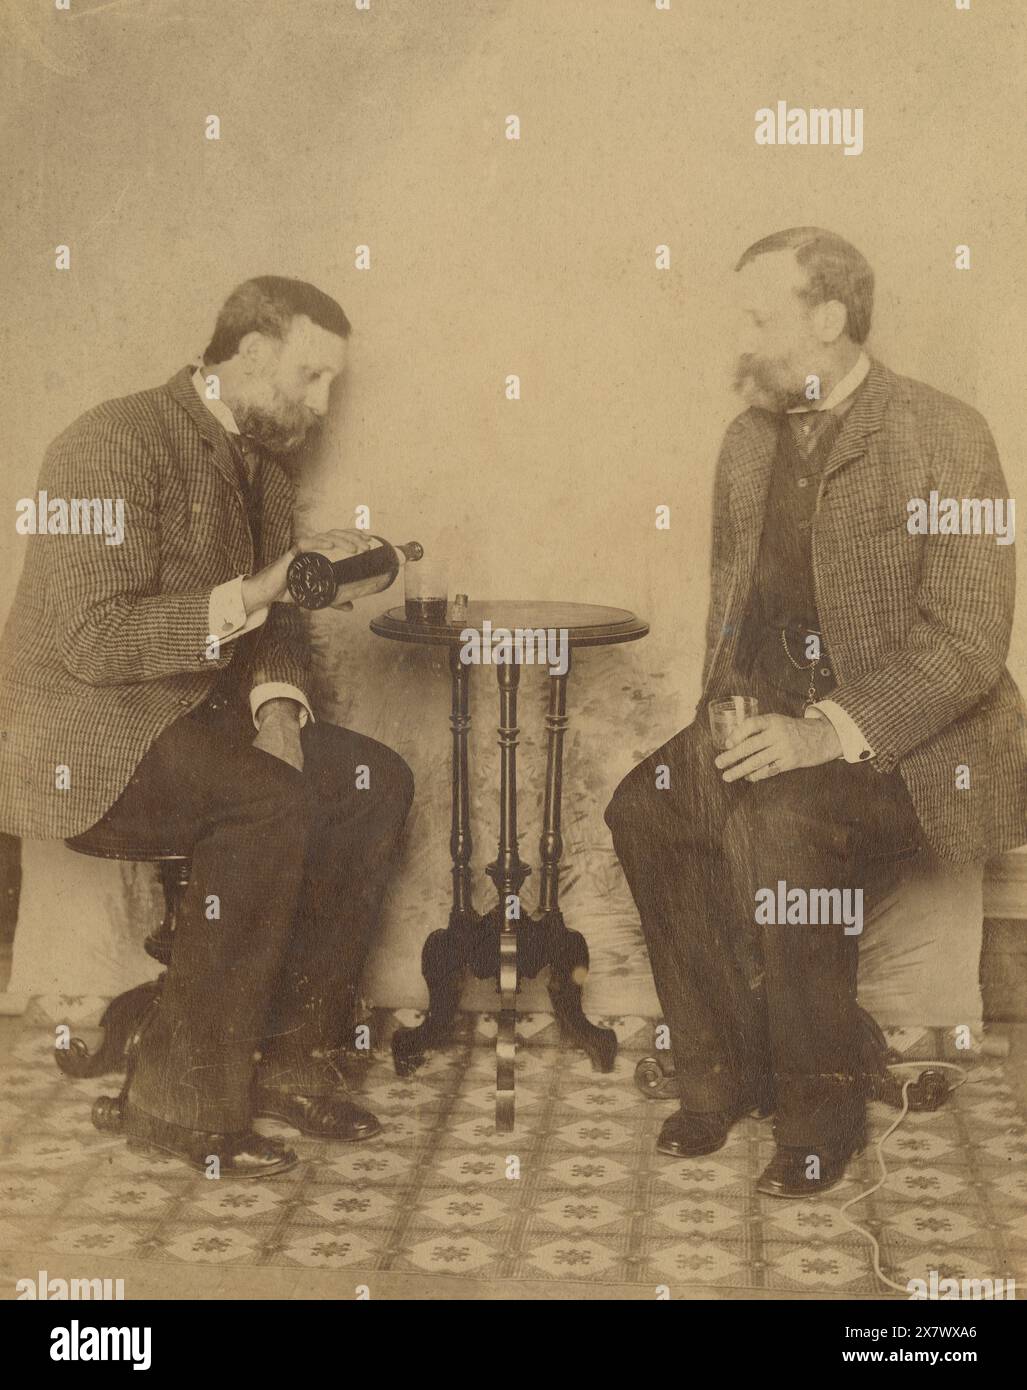 Antique c1890 photograph, brothers drinking whiskey together. They are seven years apart, but look like twins. Exact location unknown, probably Massachusetts or Rhode Island, USA. SOURCE: ORIGINAL PHOTOGRAPH Stock Photo